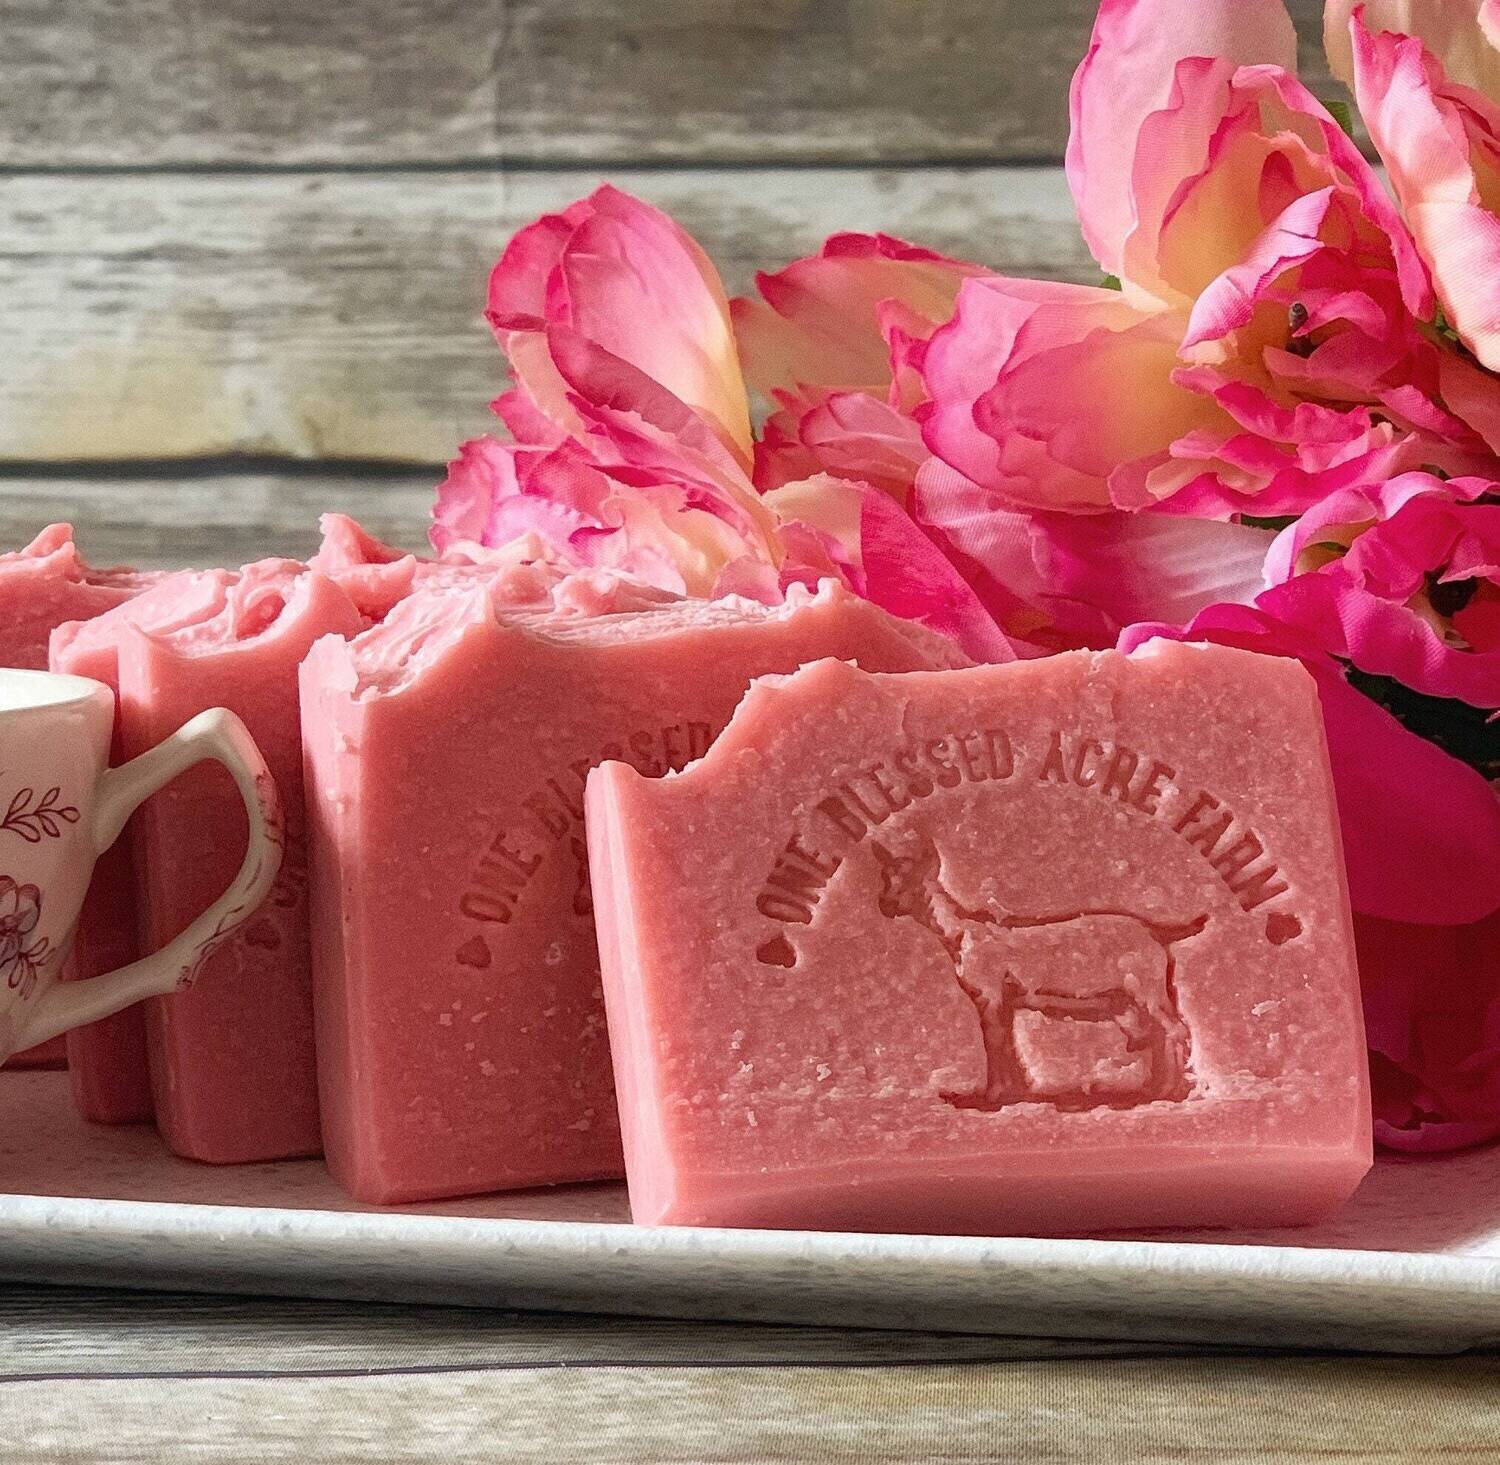 Victorian Rose Goat Milk Bar Soap, Natural Cleansing Bar, Lush Lather, Moisturizing, Eczema, Dry Skin Relief, Skin Care